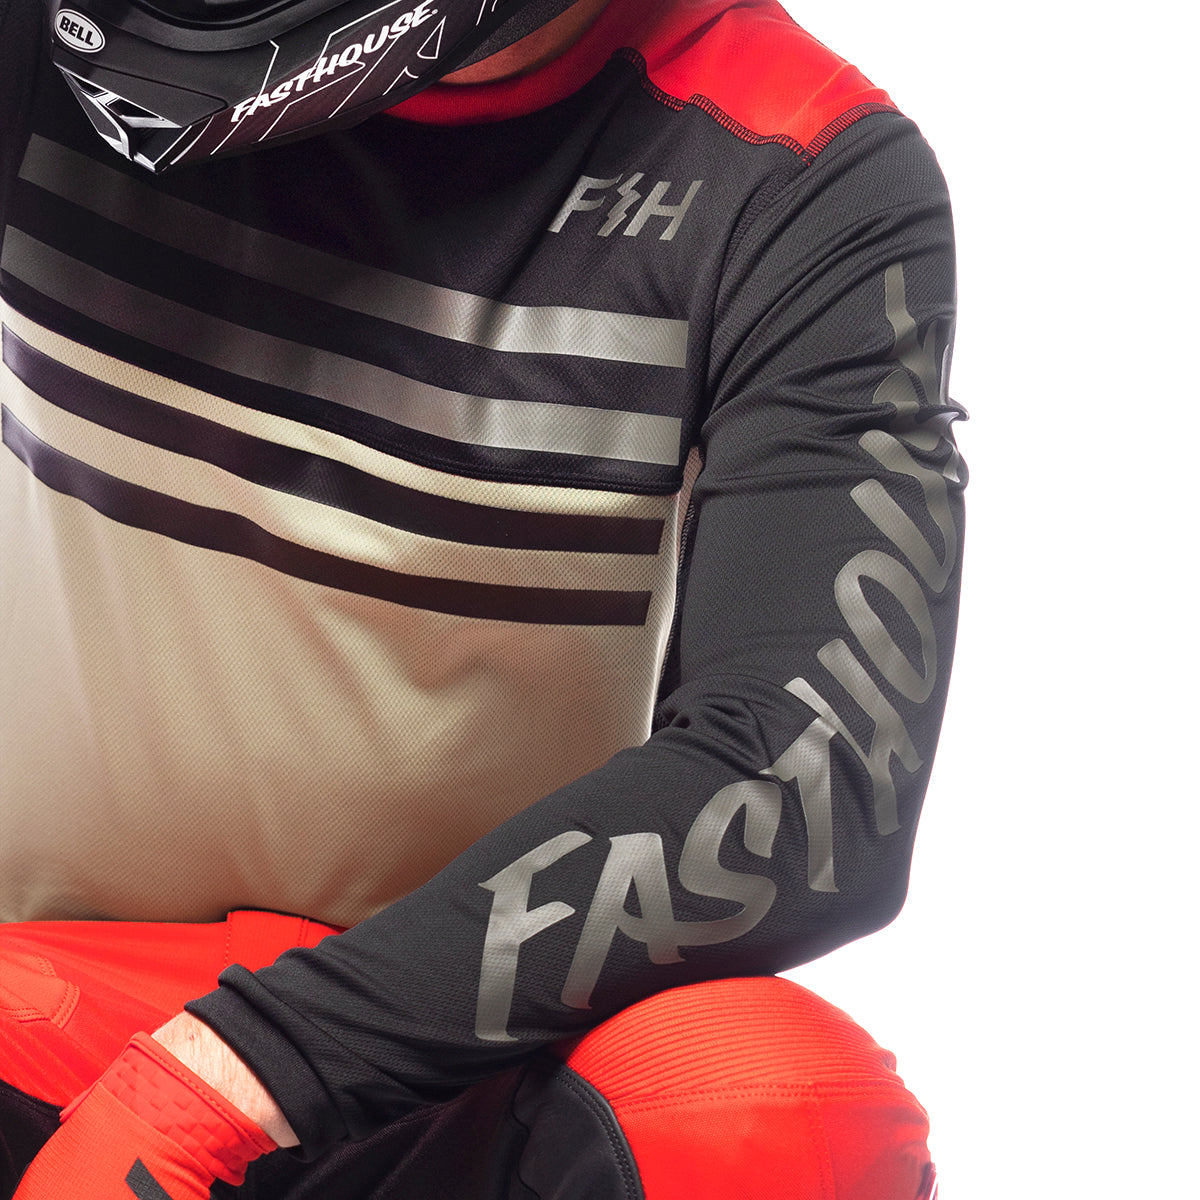 Grindhouse Tempo Jersey - Black/Infrared